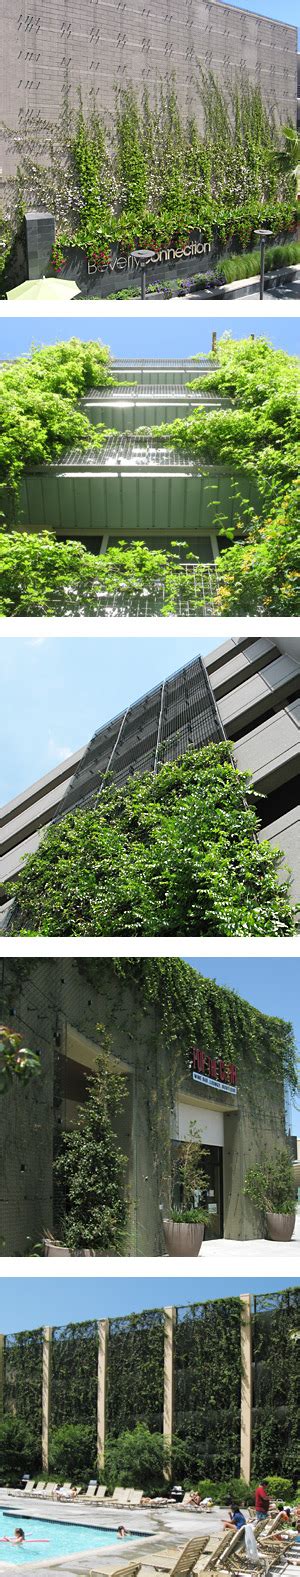 Greenscreen® Is An Innovative Landscape Trellis System That Provides